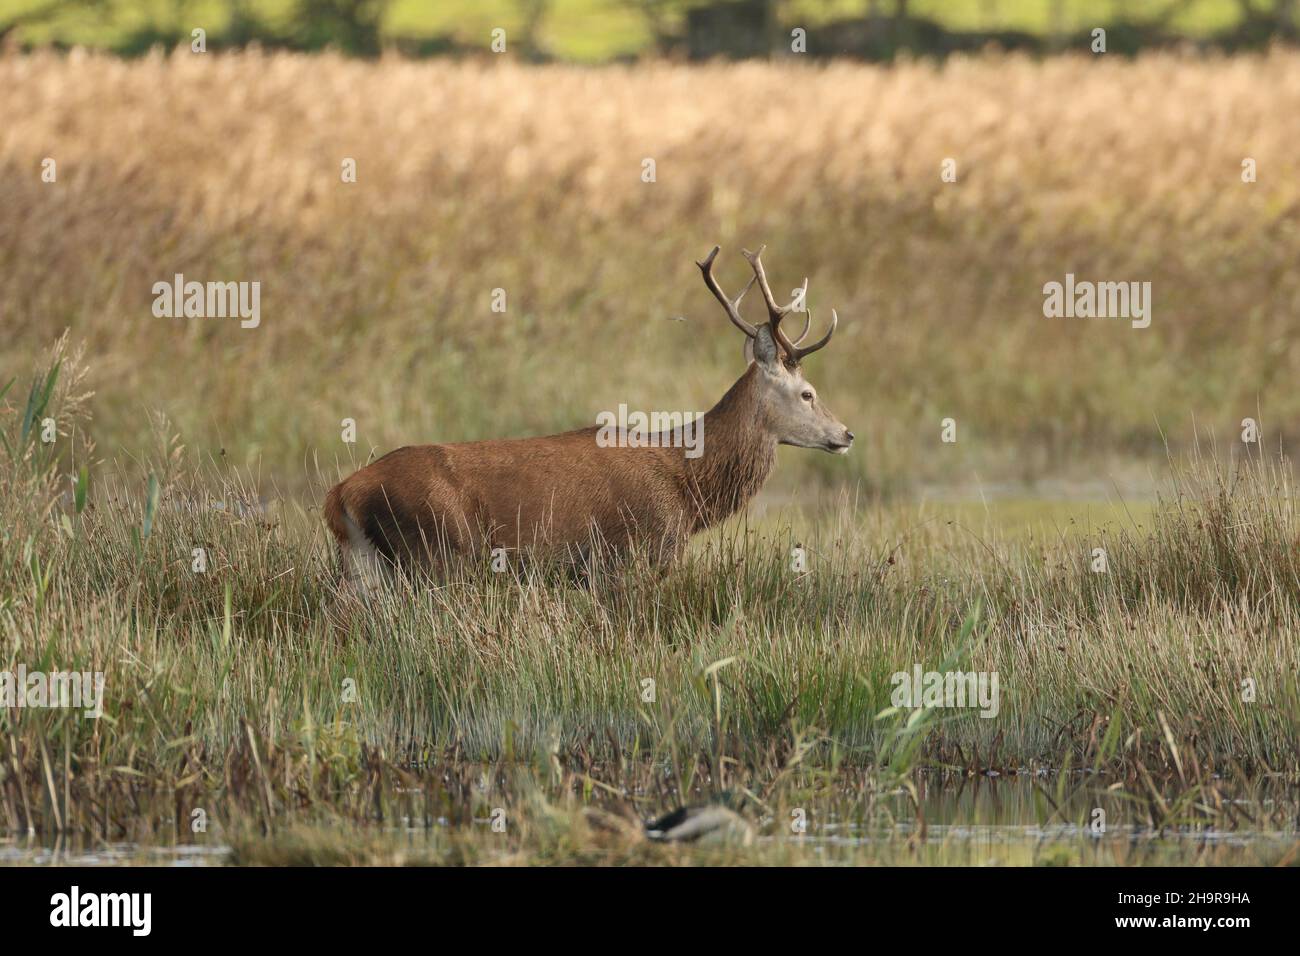 Red deer mate in the Autumn (the Rut) when the stags clash for dominance, the dominant animal having a harem of hinds which he mates with. Stock Photo